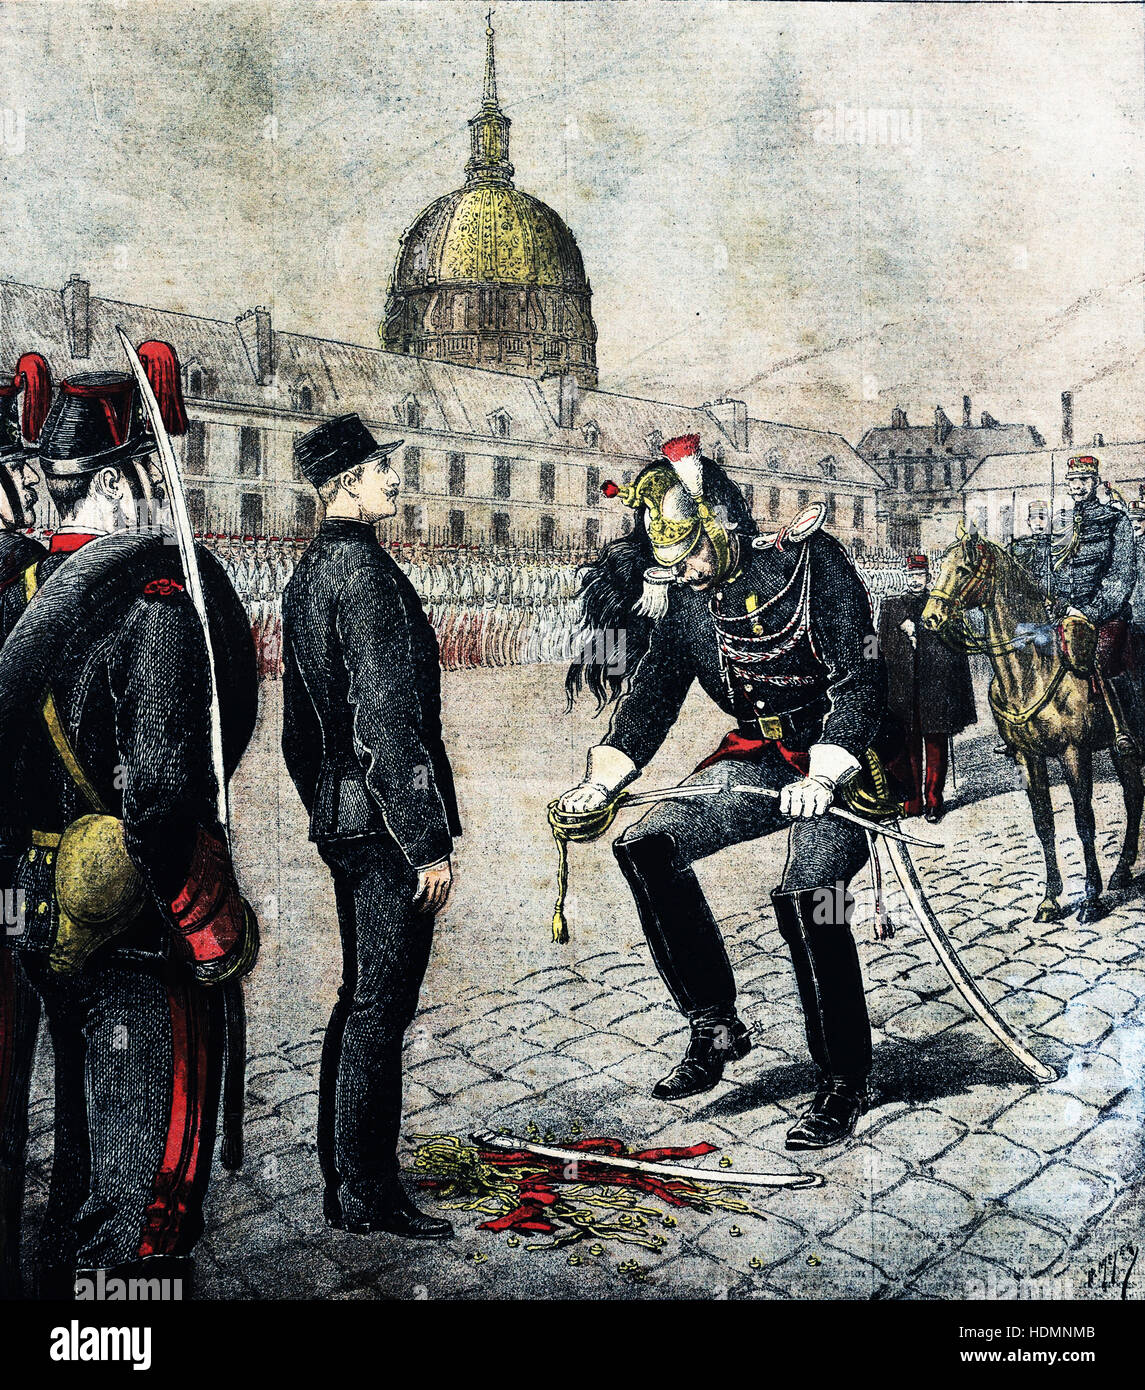 THE TRAITOR. DEGRADATION OF ALFRED DREYFUS. ILLUSTRATED SUPPLEMENT OF 'Le Petit Journal ' SUNDAY, JANUARY 13, 1895 Stock Photo